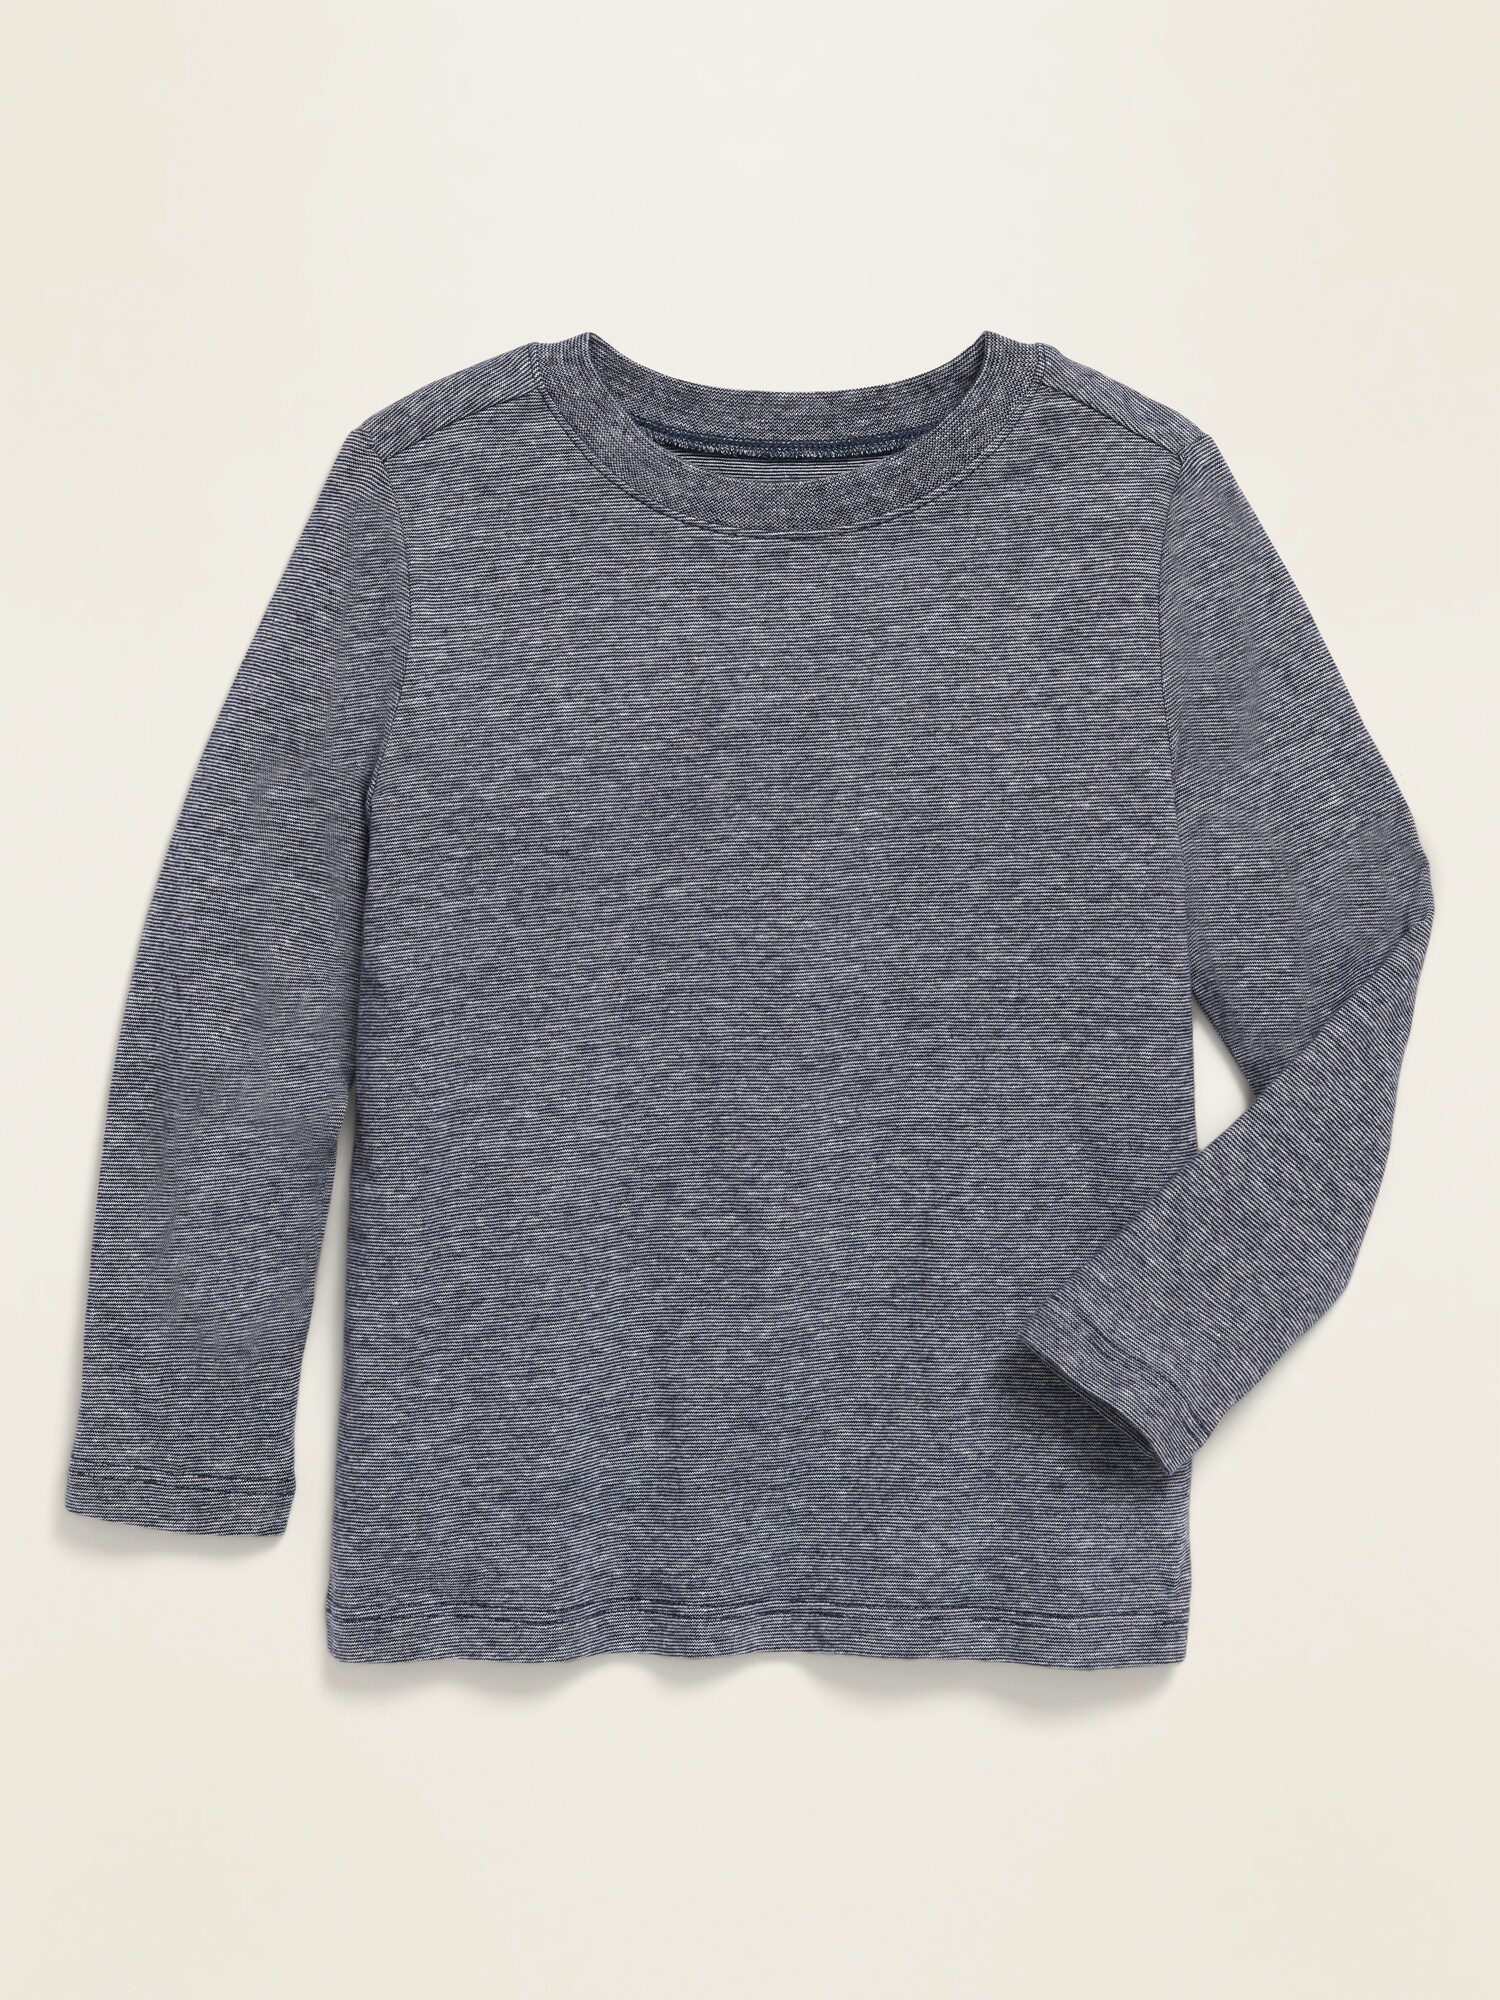 Unisex Long-Sleeve Crew-Neck Tee for Toddler | Old Navy